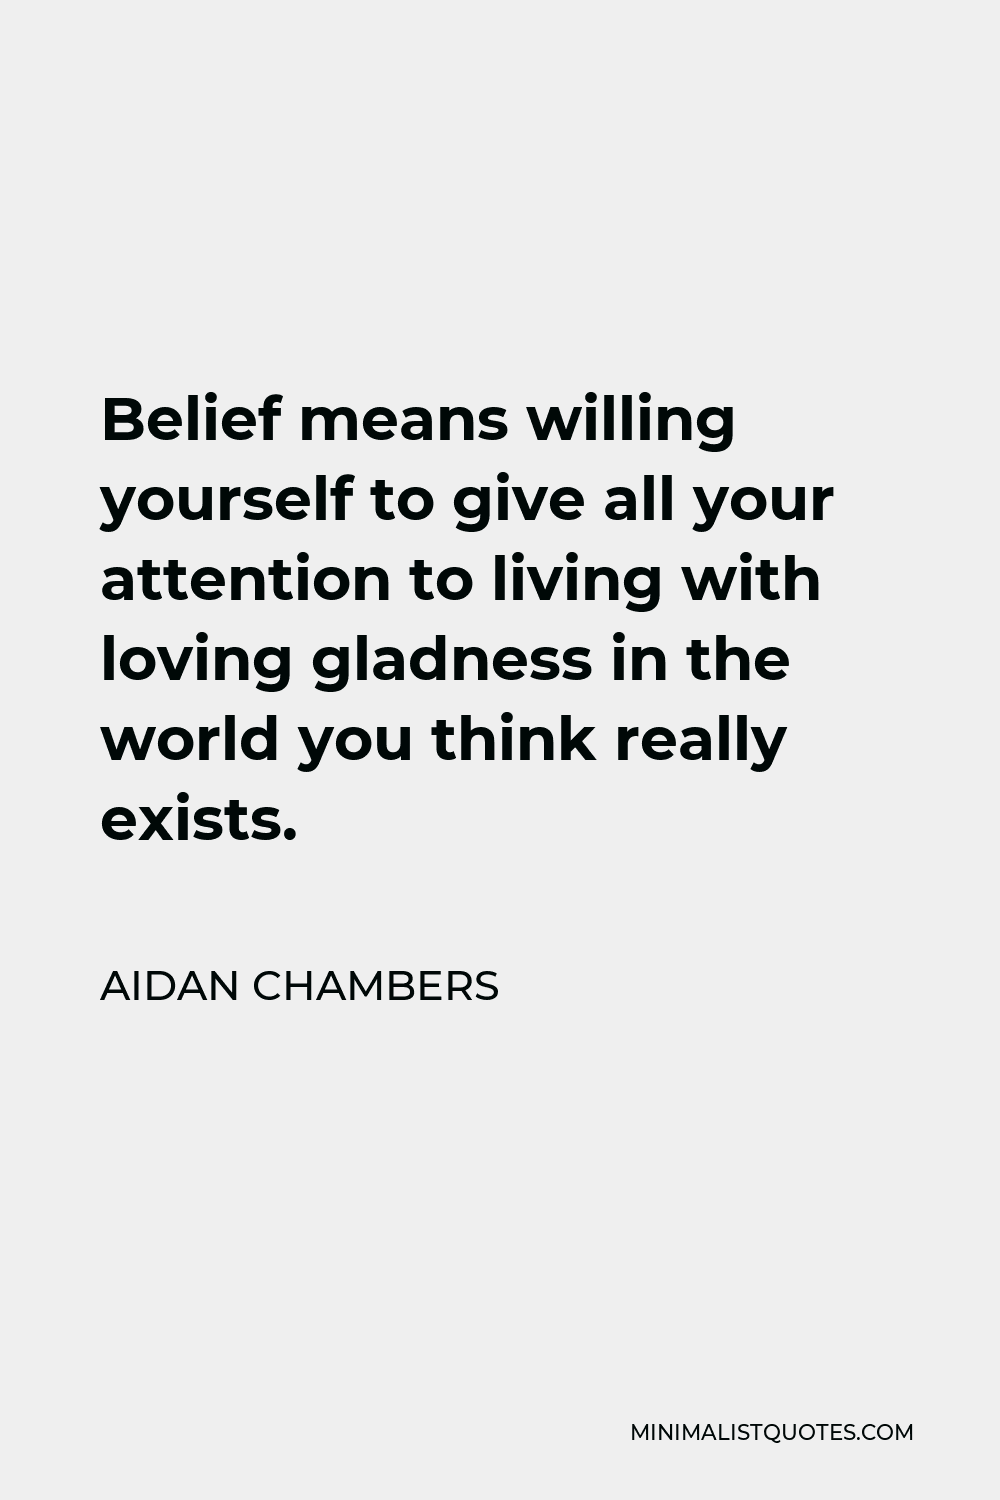 Aidan Chambers Quote - Belief means willing yourself to give all your attention to living with loving gladness in the world you think really exists.